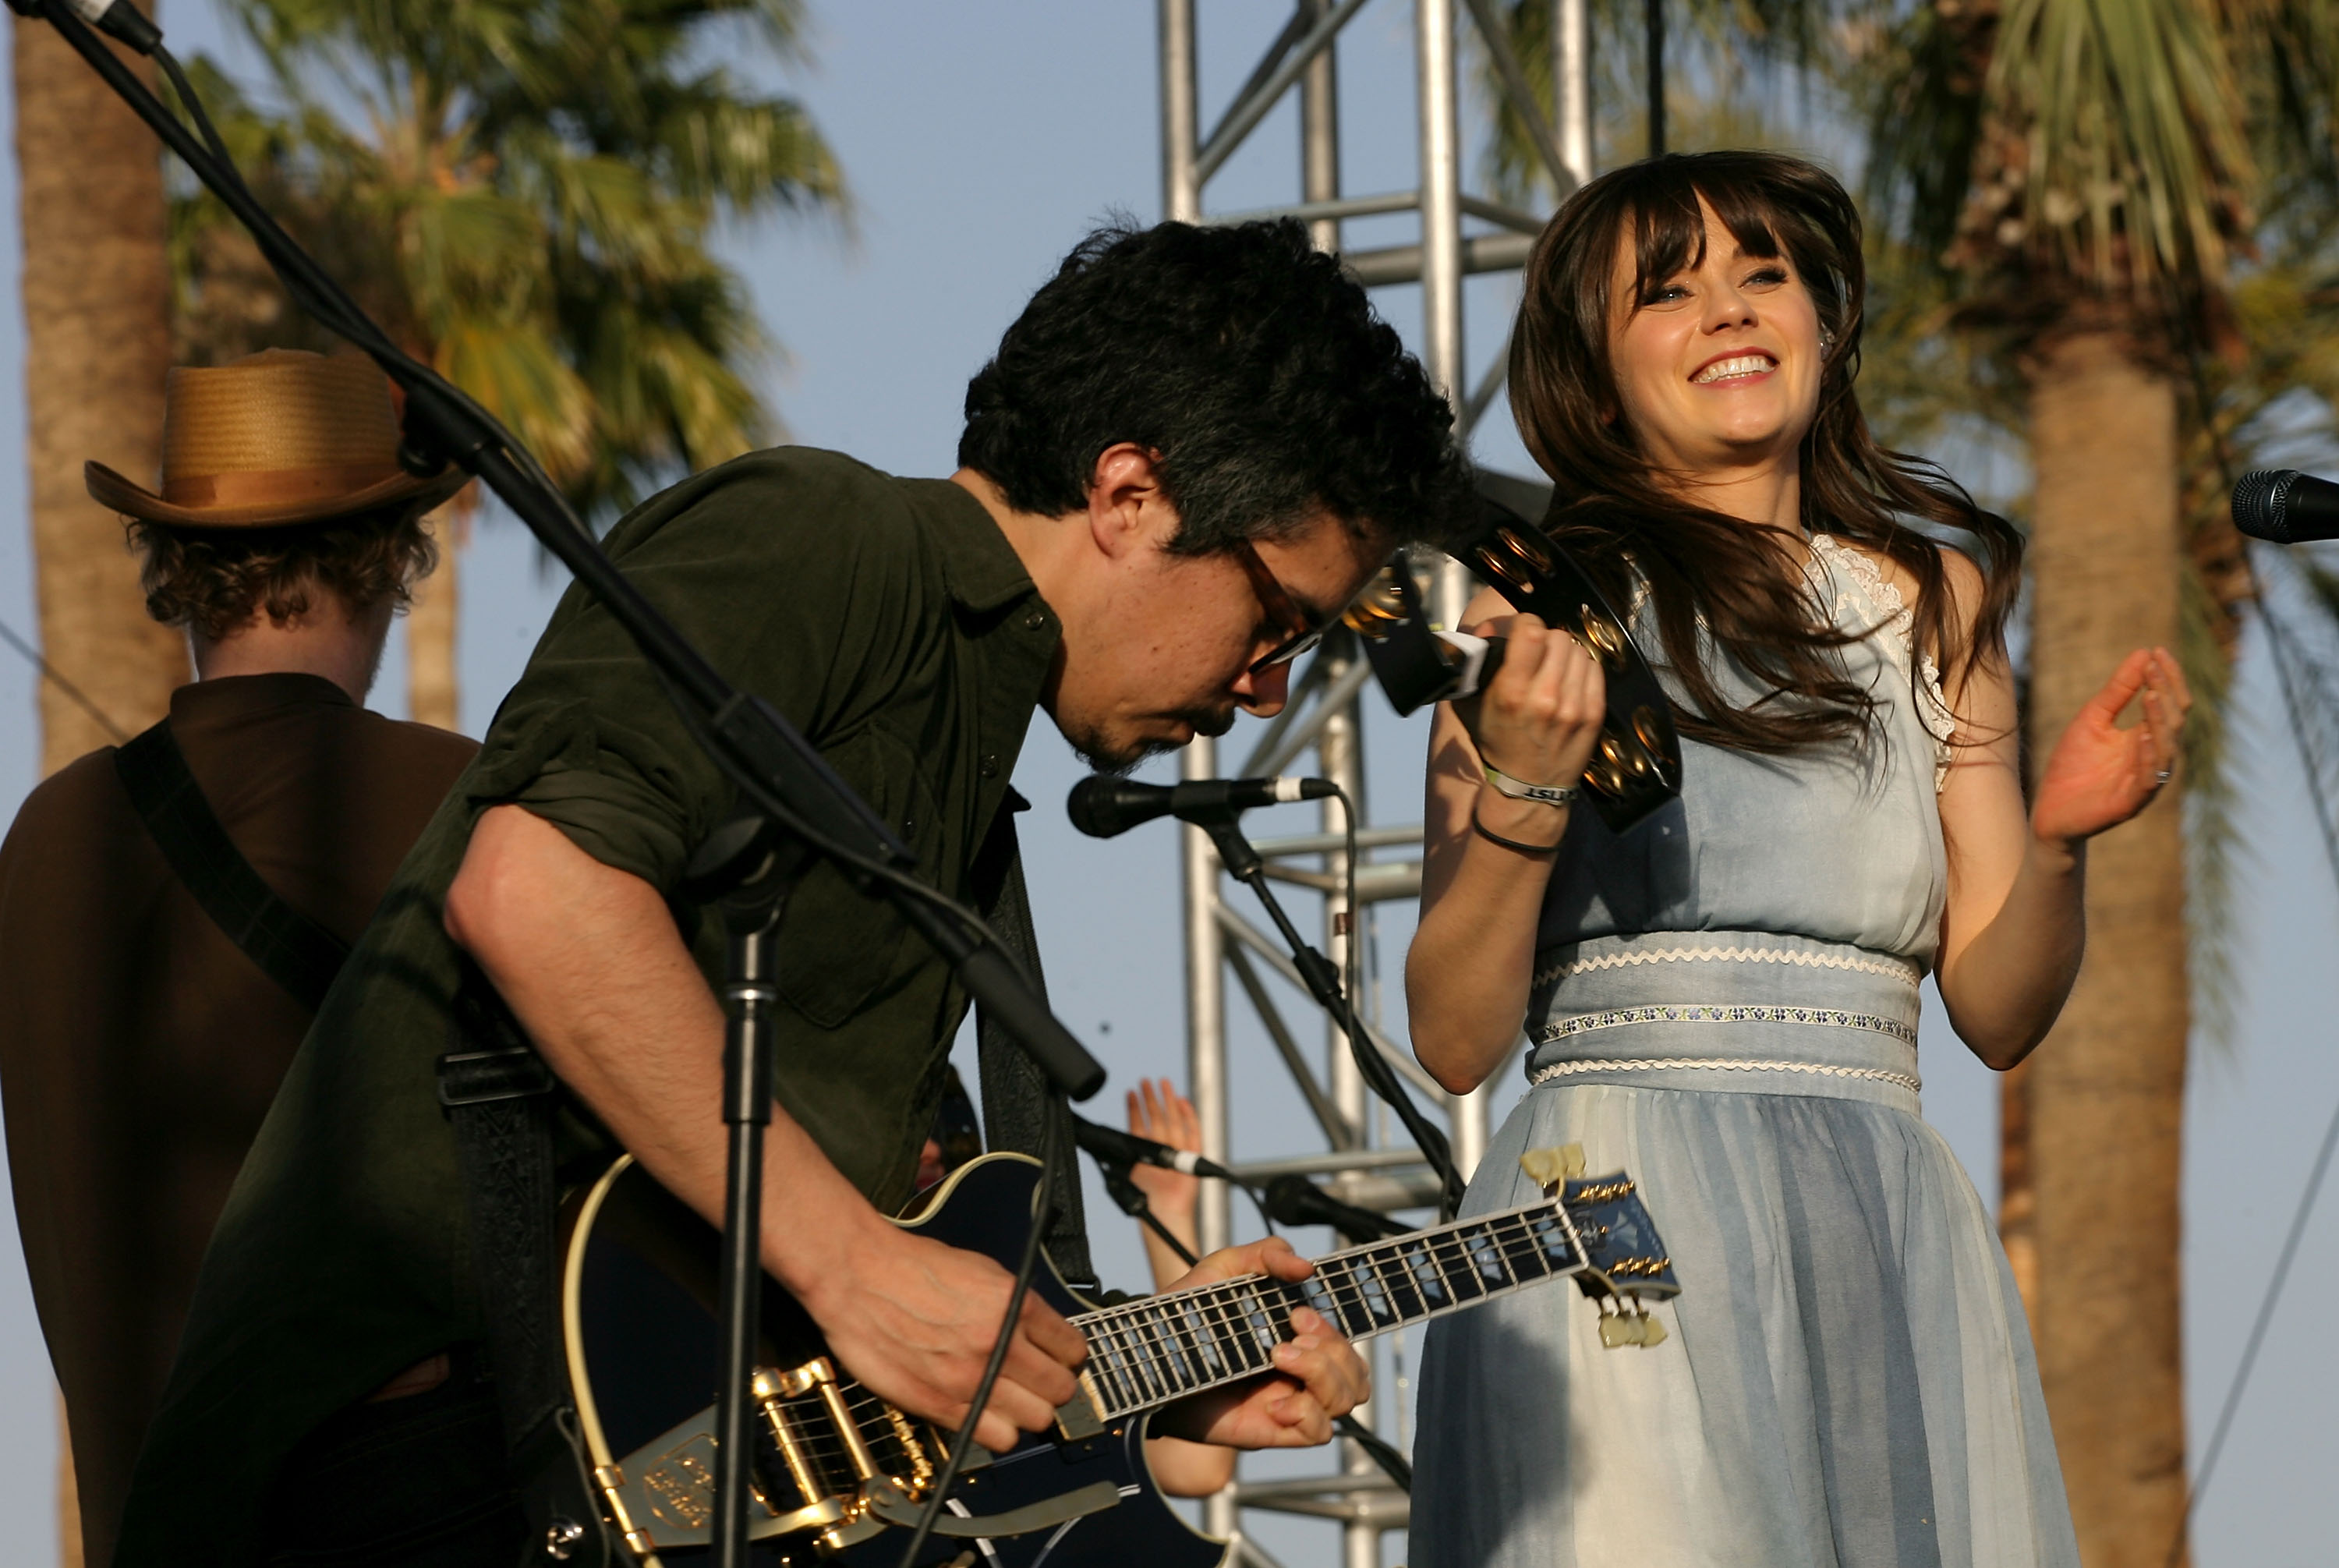 She & Him share two new songs